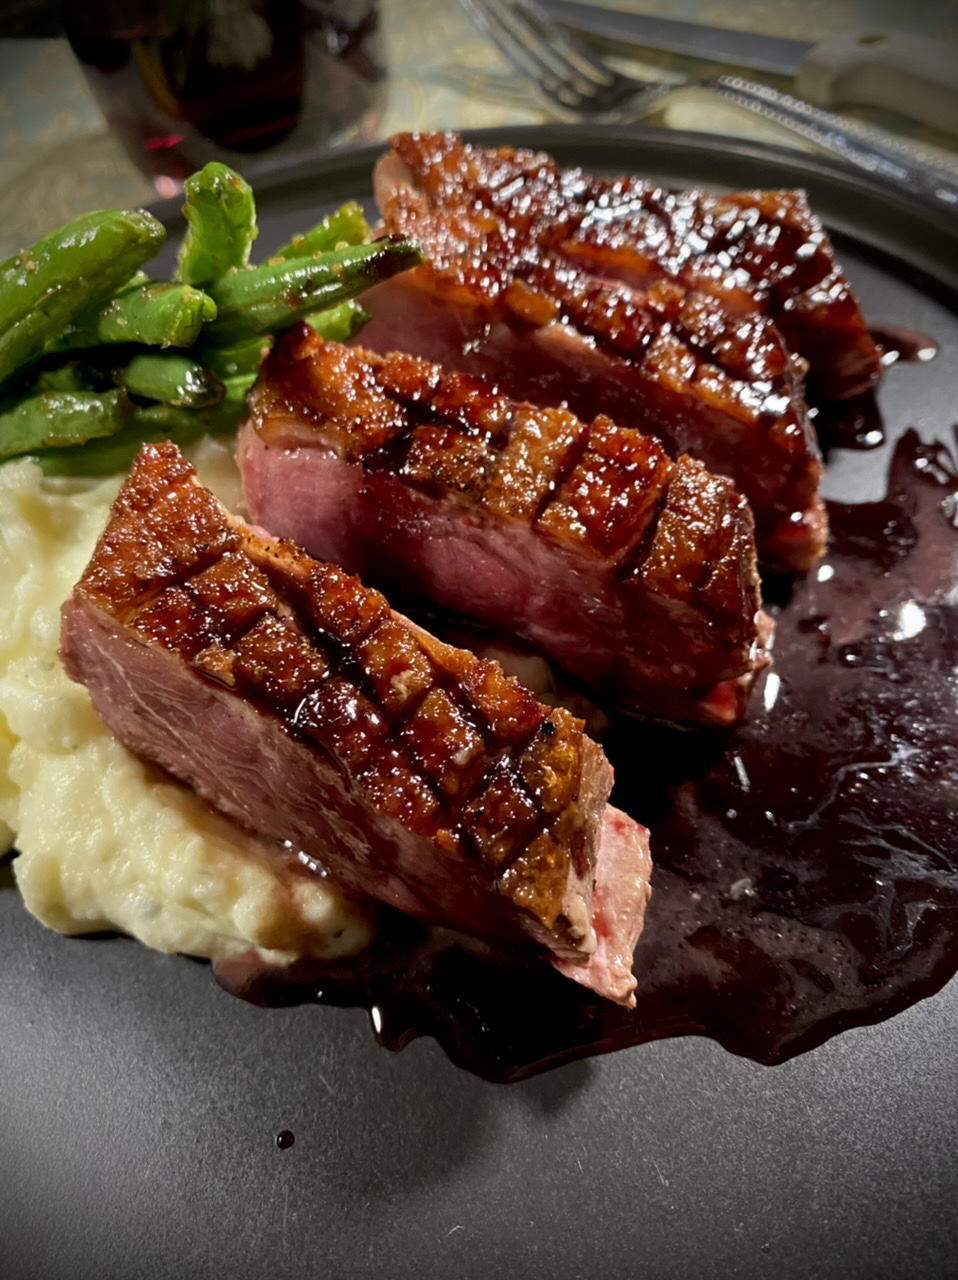 D810FAEF 178E 4ACD B052 204DD44C4529 - Seared Duck Breast with Reduced Pomegranate Sauce